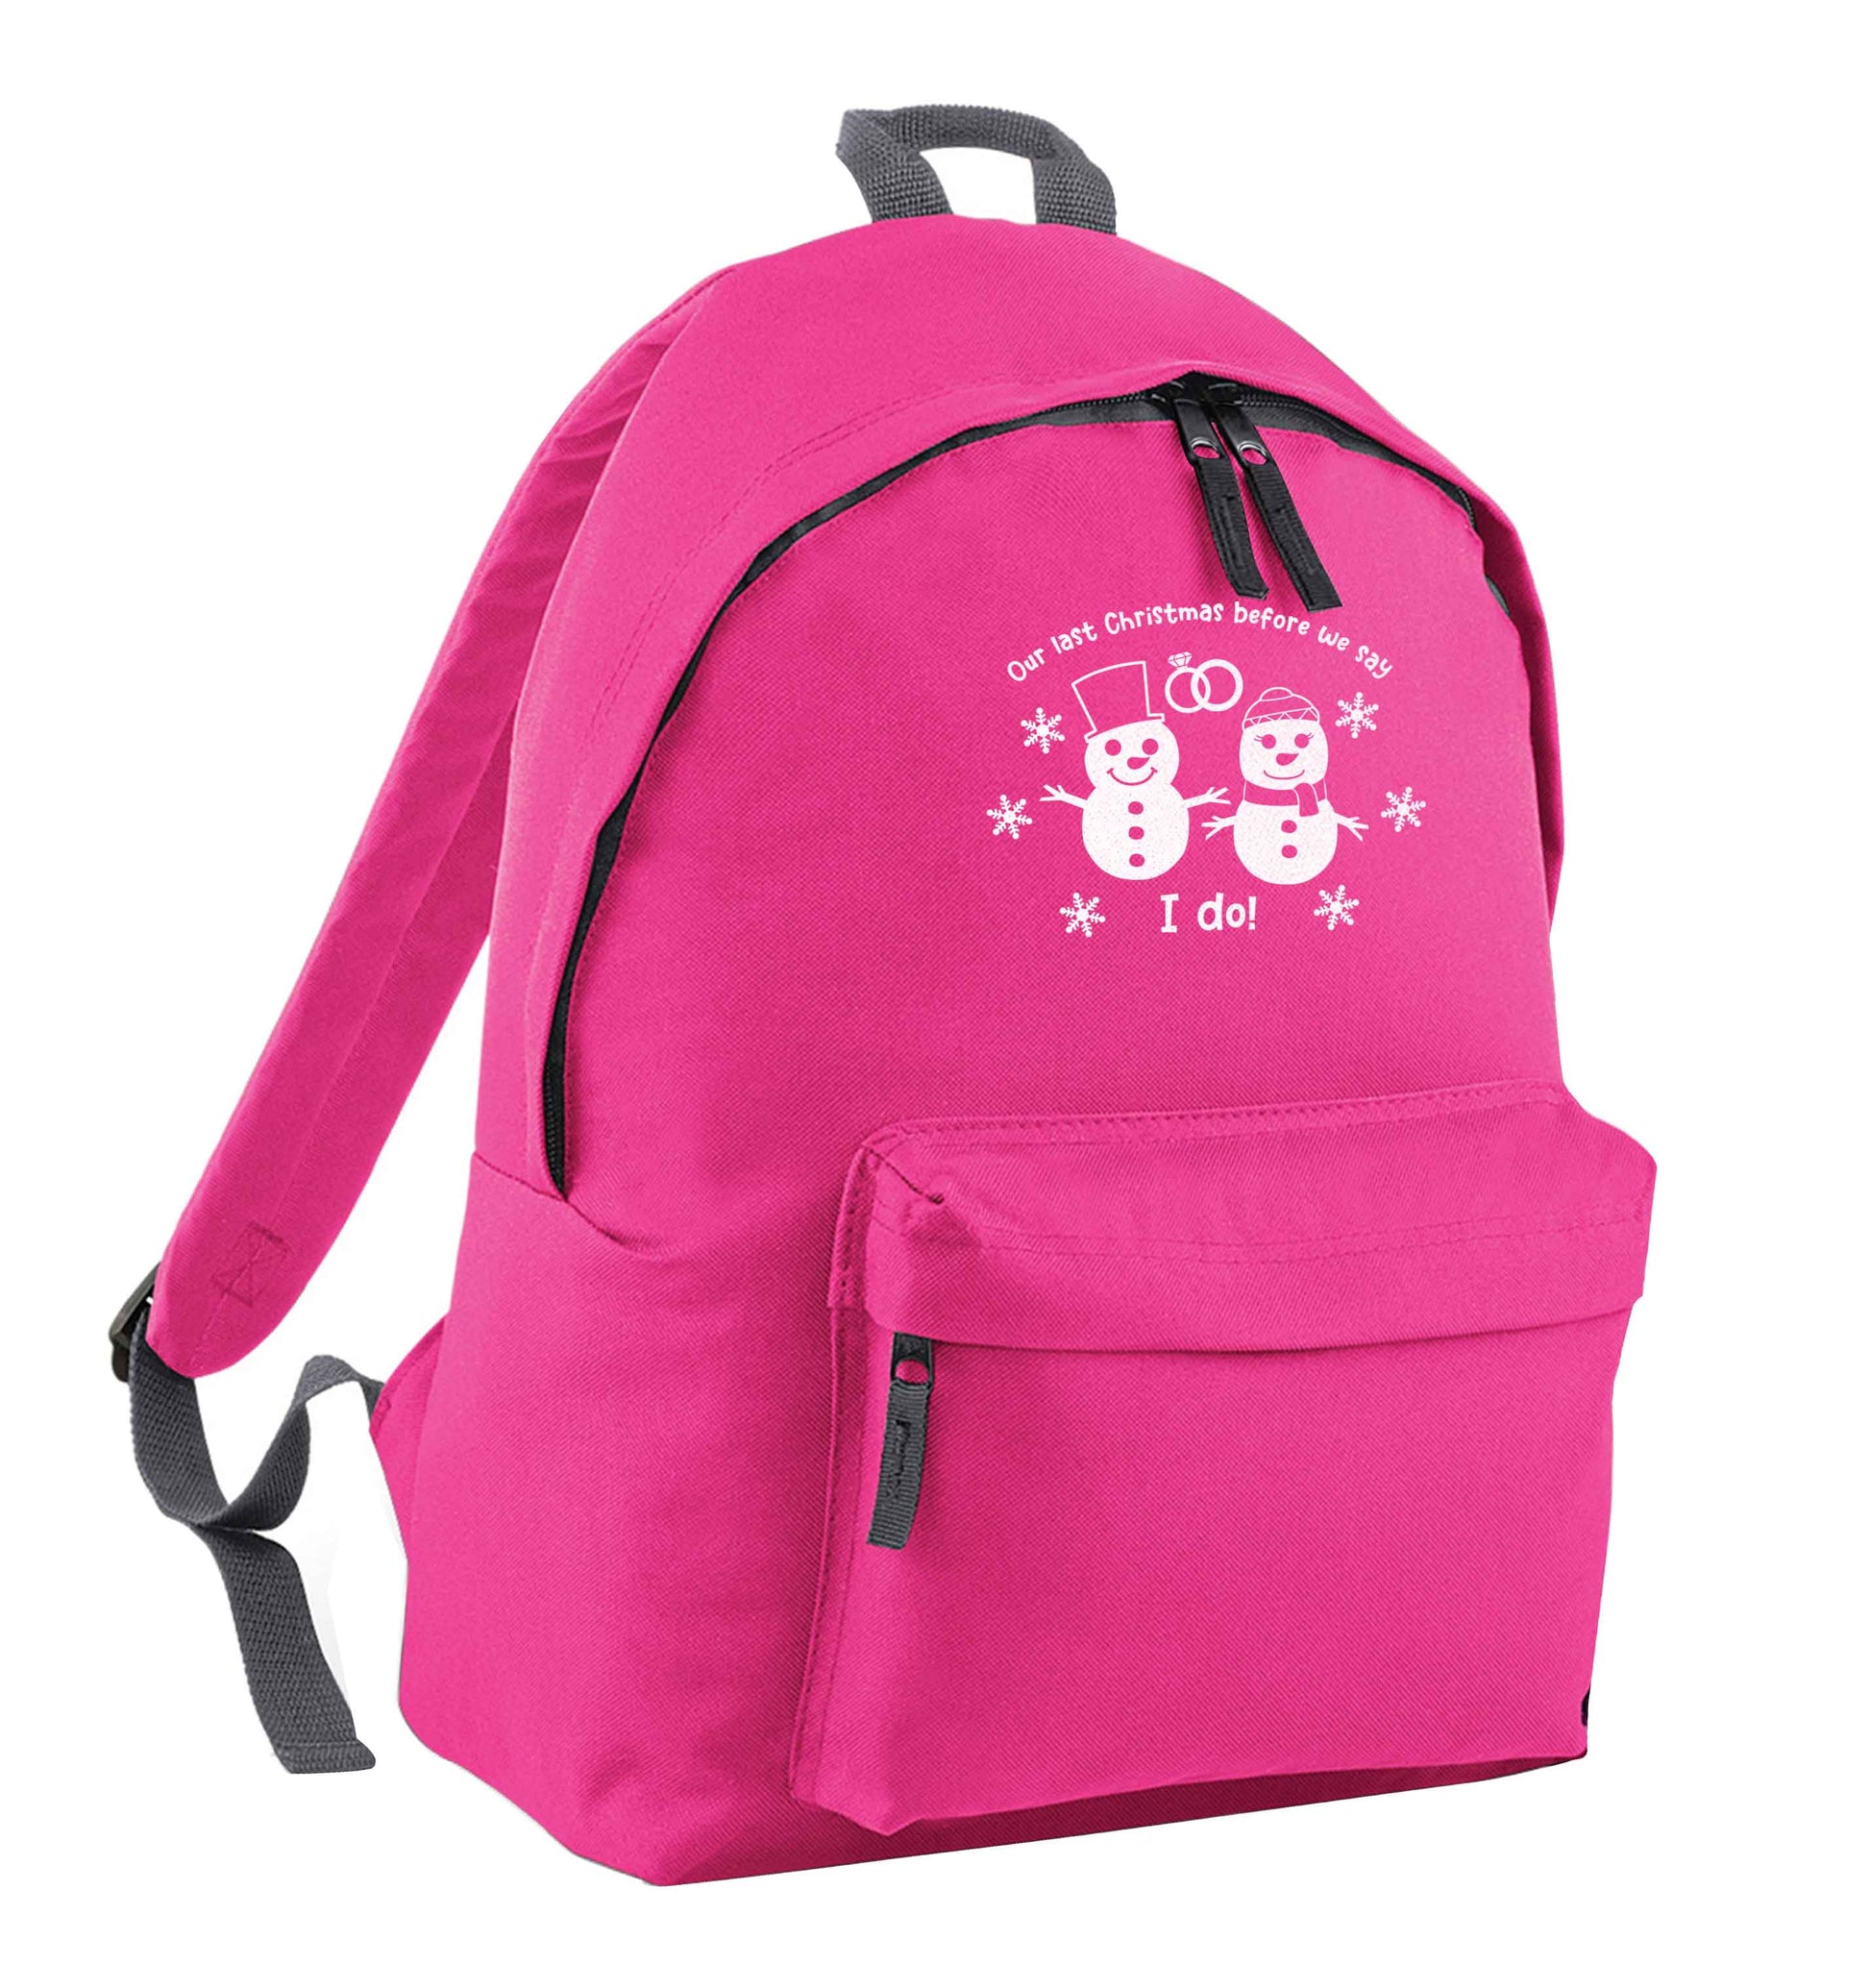 Last Christmas before we say I do pink children's backpack